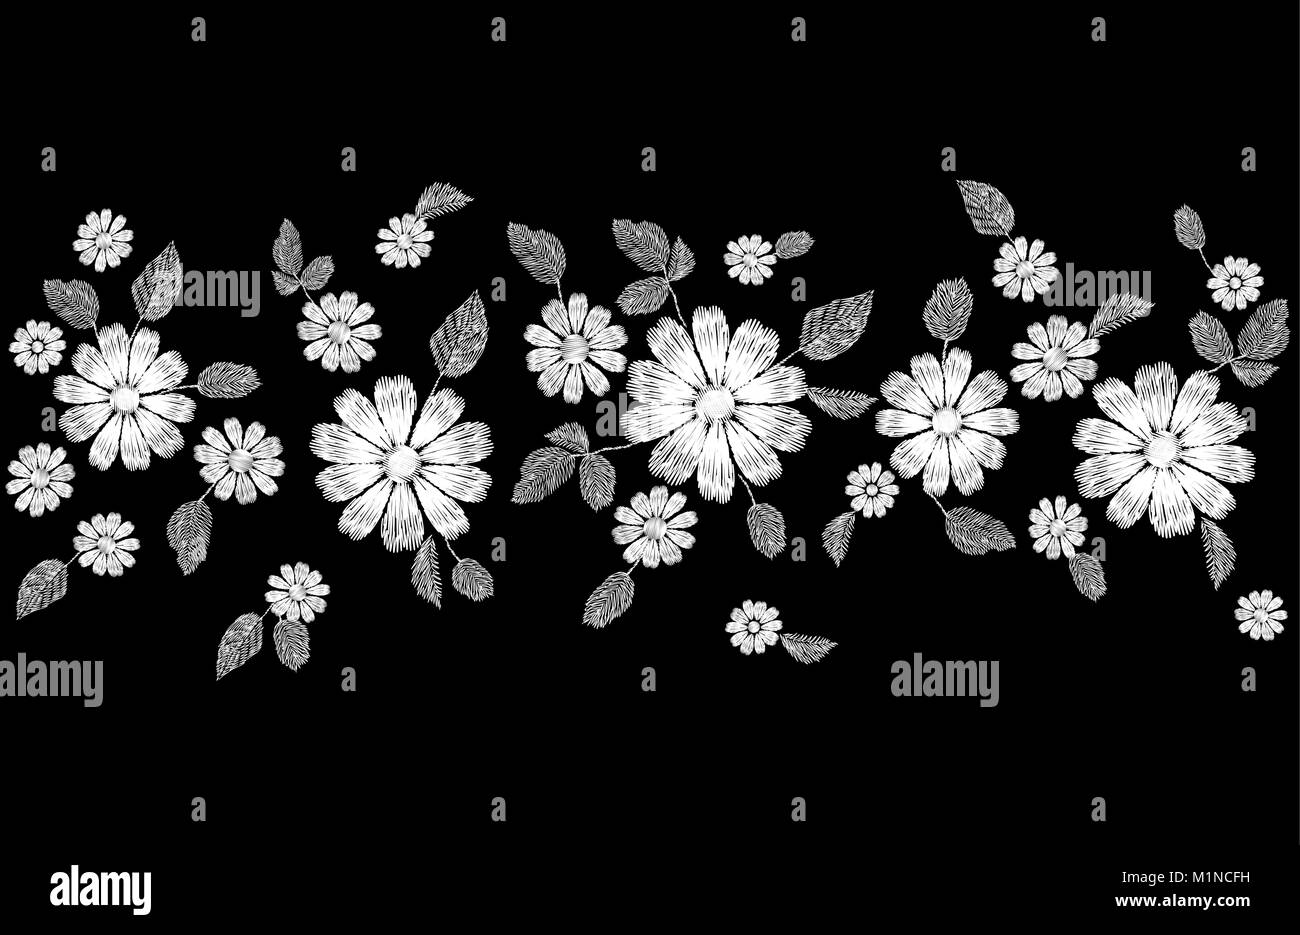 White lace flower embroidery seamless border. Fashion decoration stitched texture template. Ethnic traditional daisy field plant leaves textile print design vector illustration Stock Vector